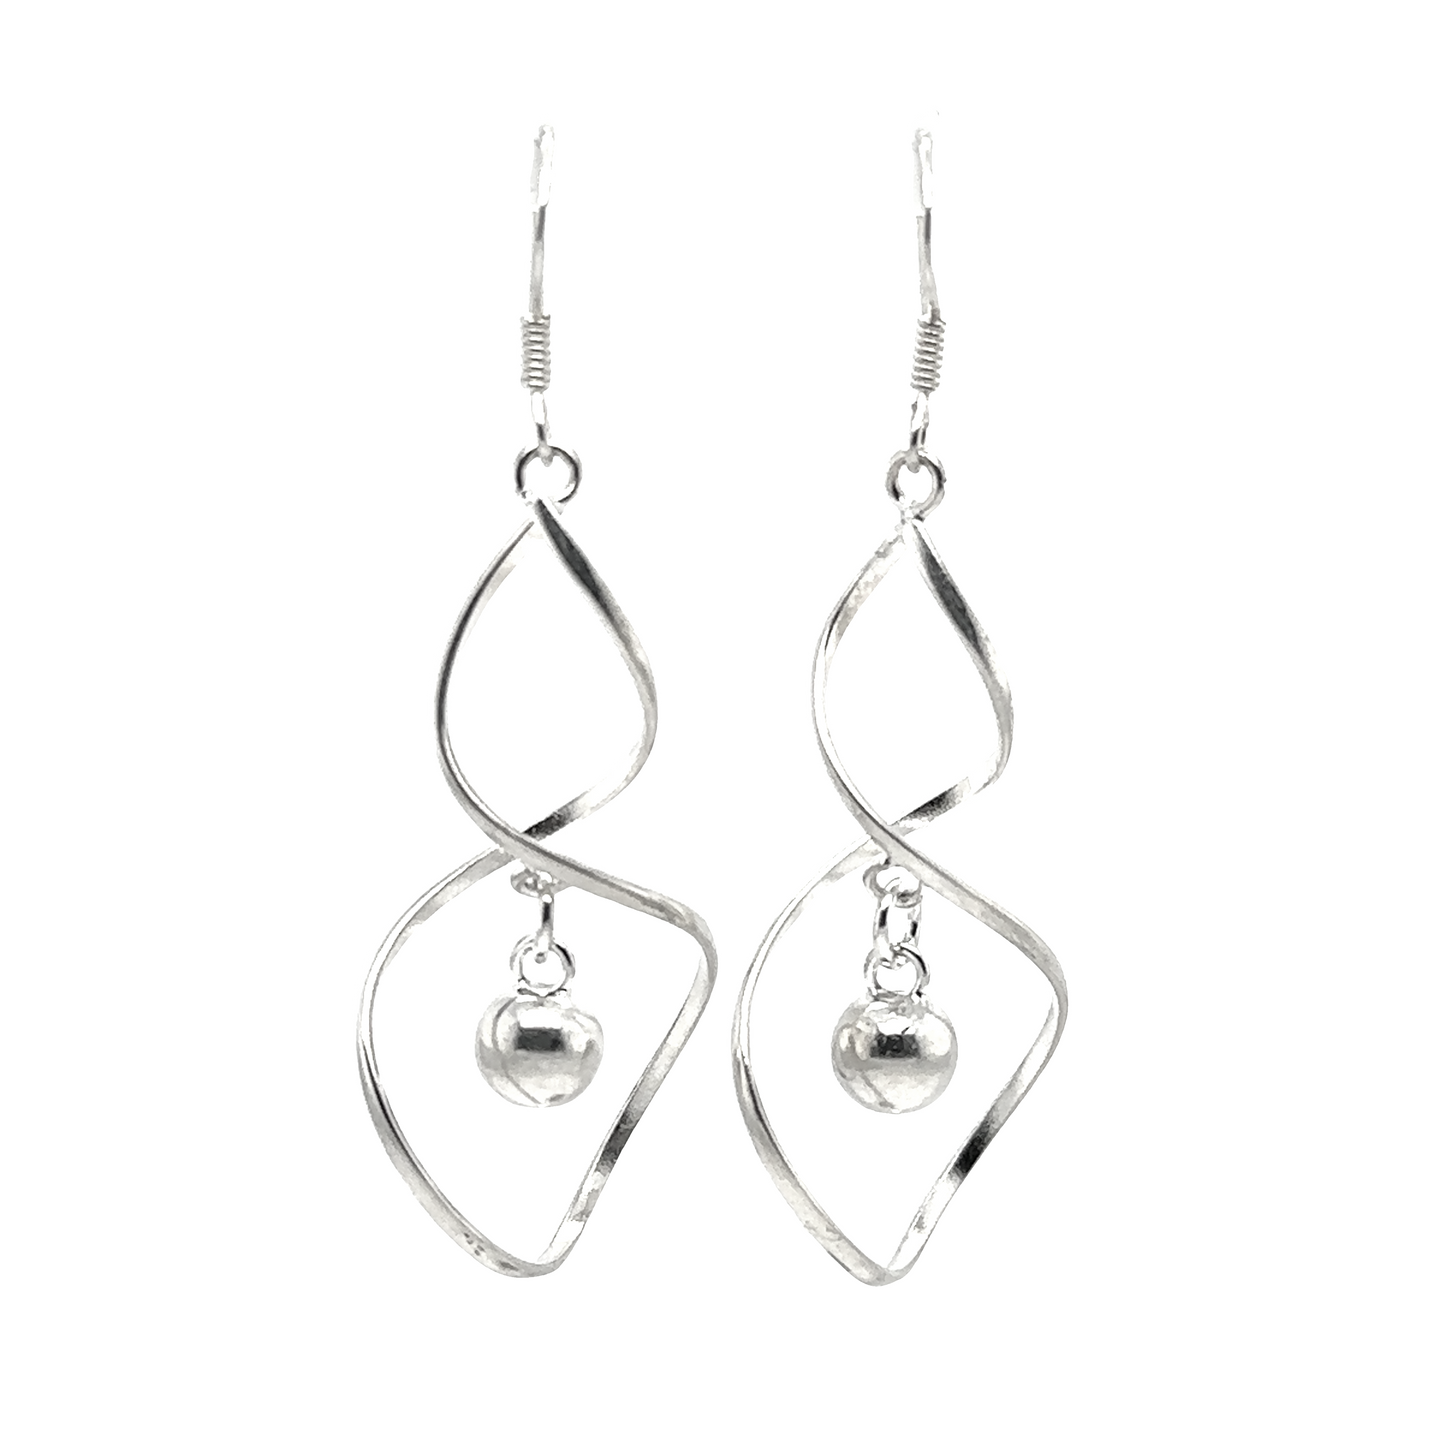 A pair of Super Silver's Freeform Wavy Silver Earrings with Balls, with a contemporary design.